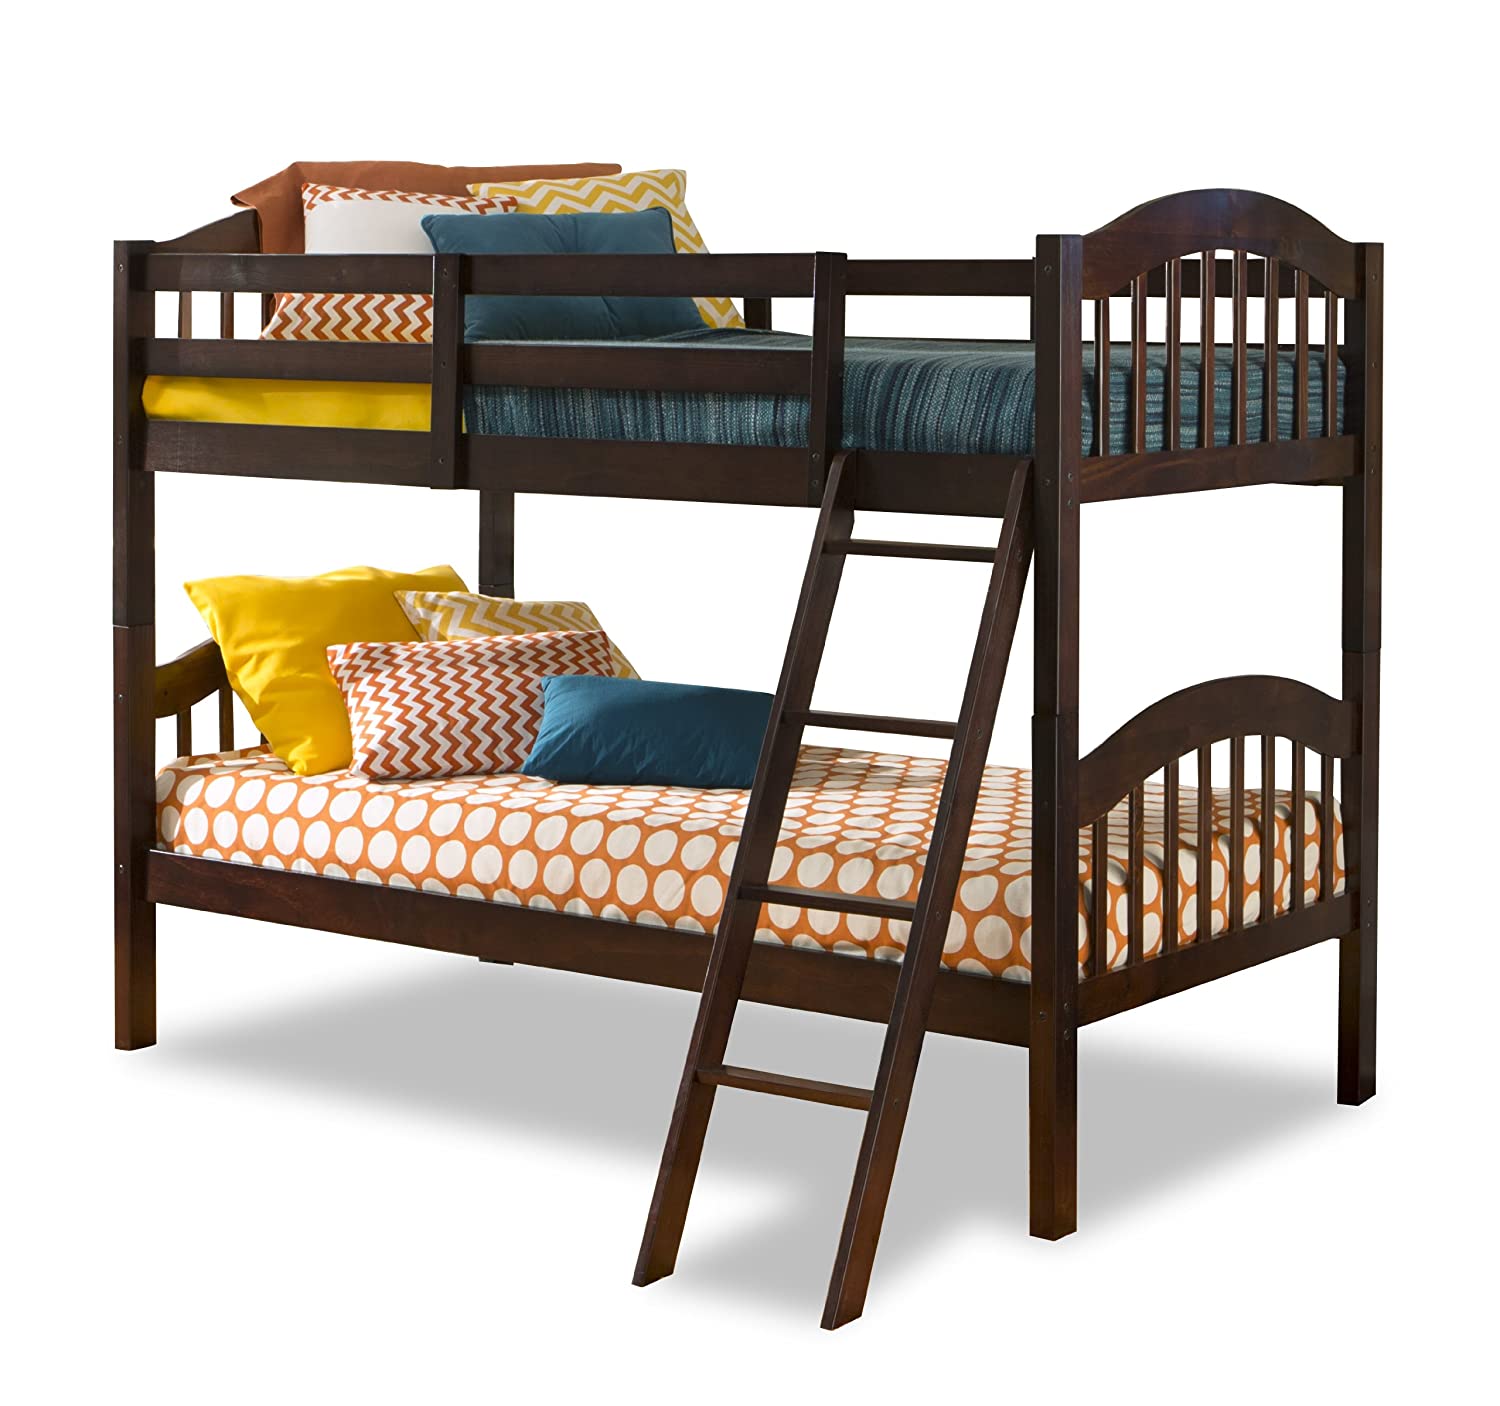 7 Best Kids Bunk Beds Under $200 2023 - Buying Guide 2